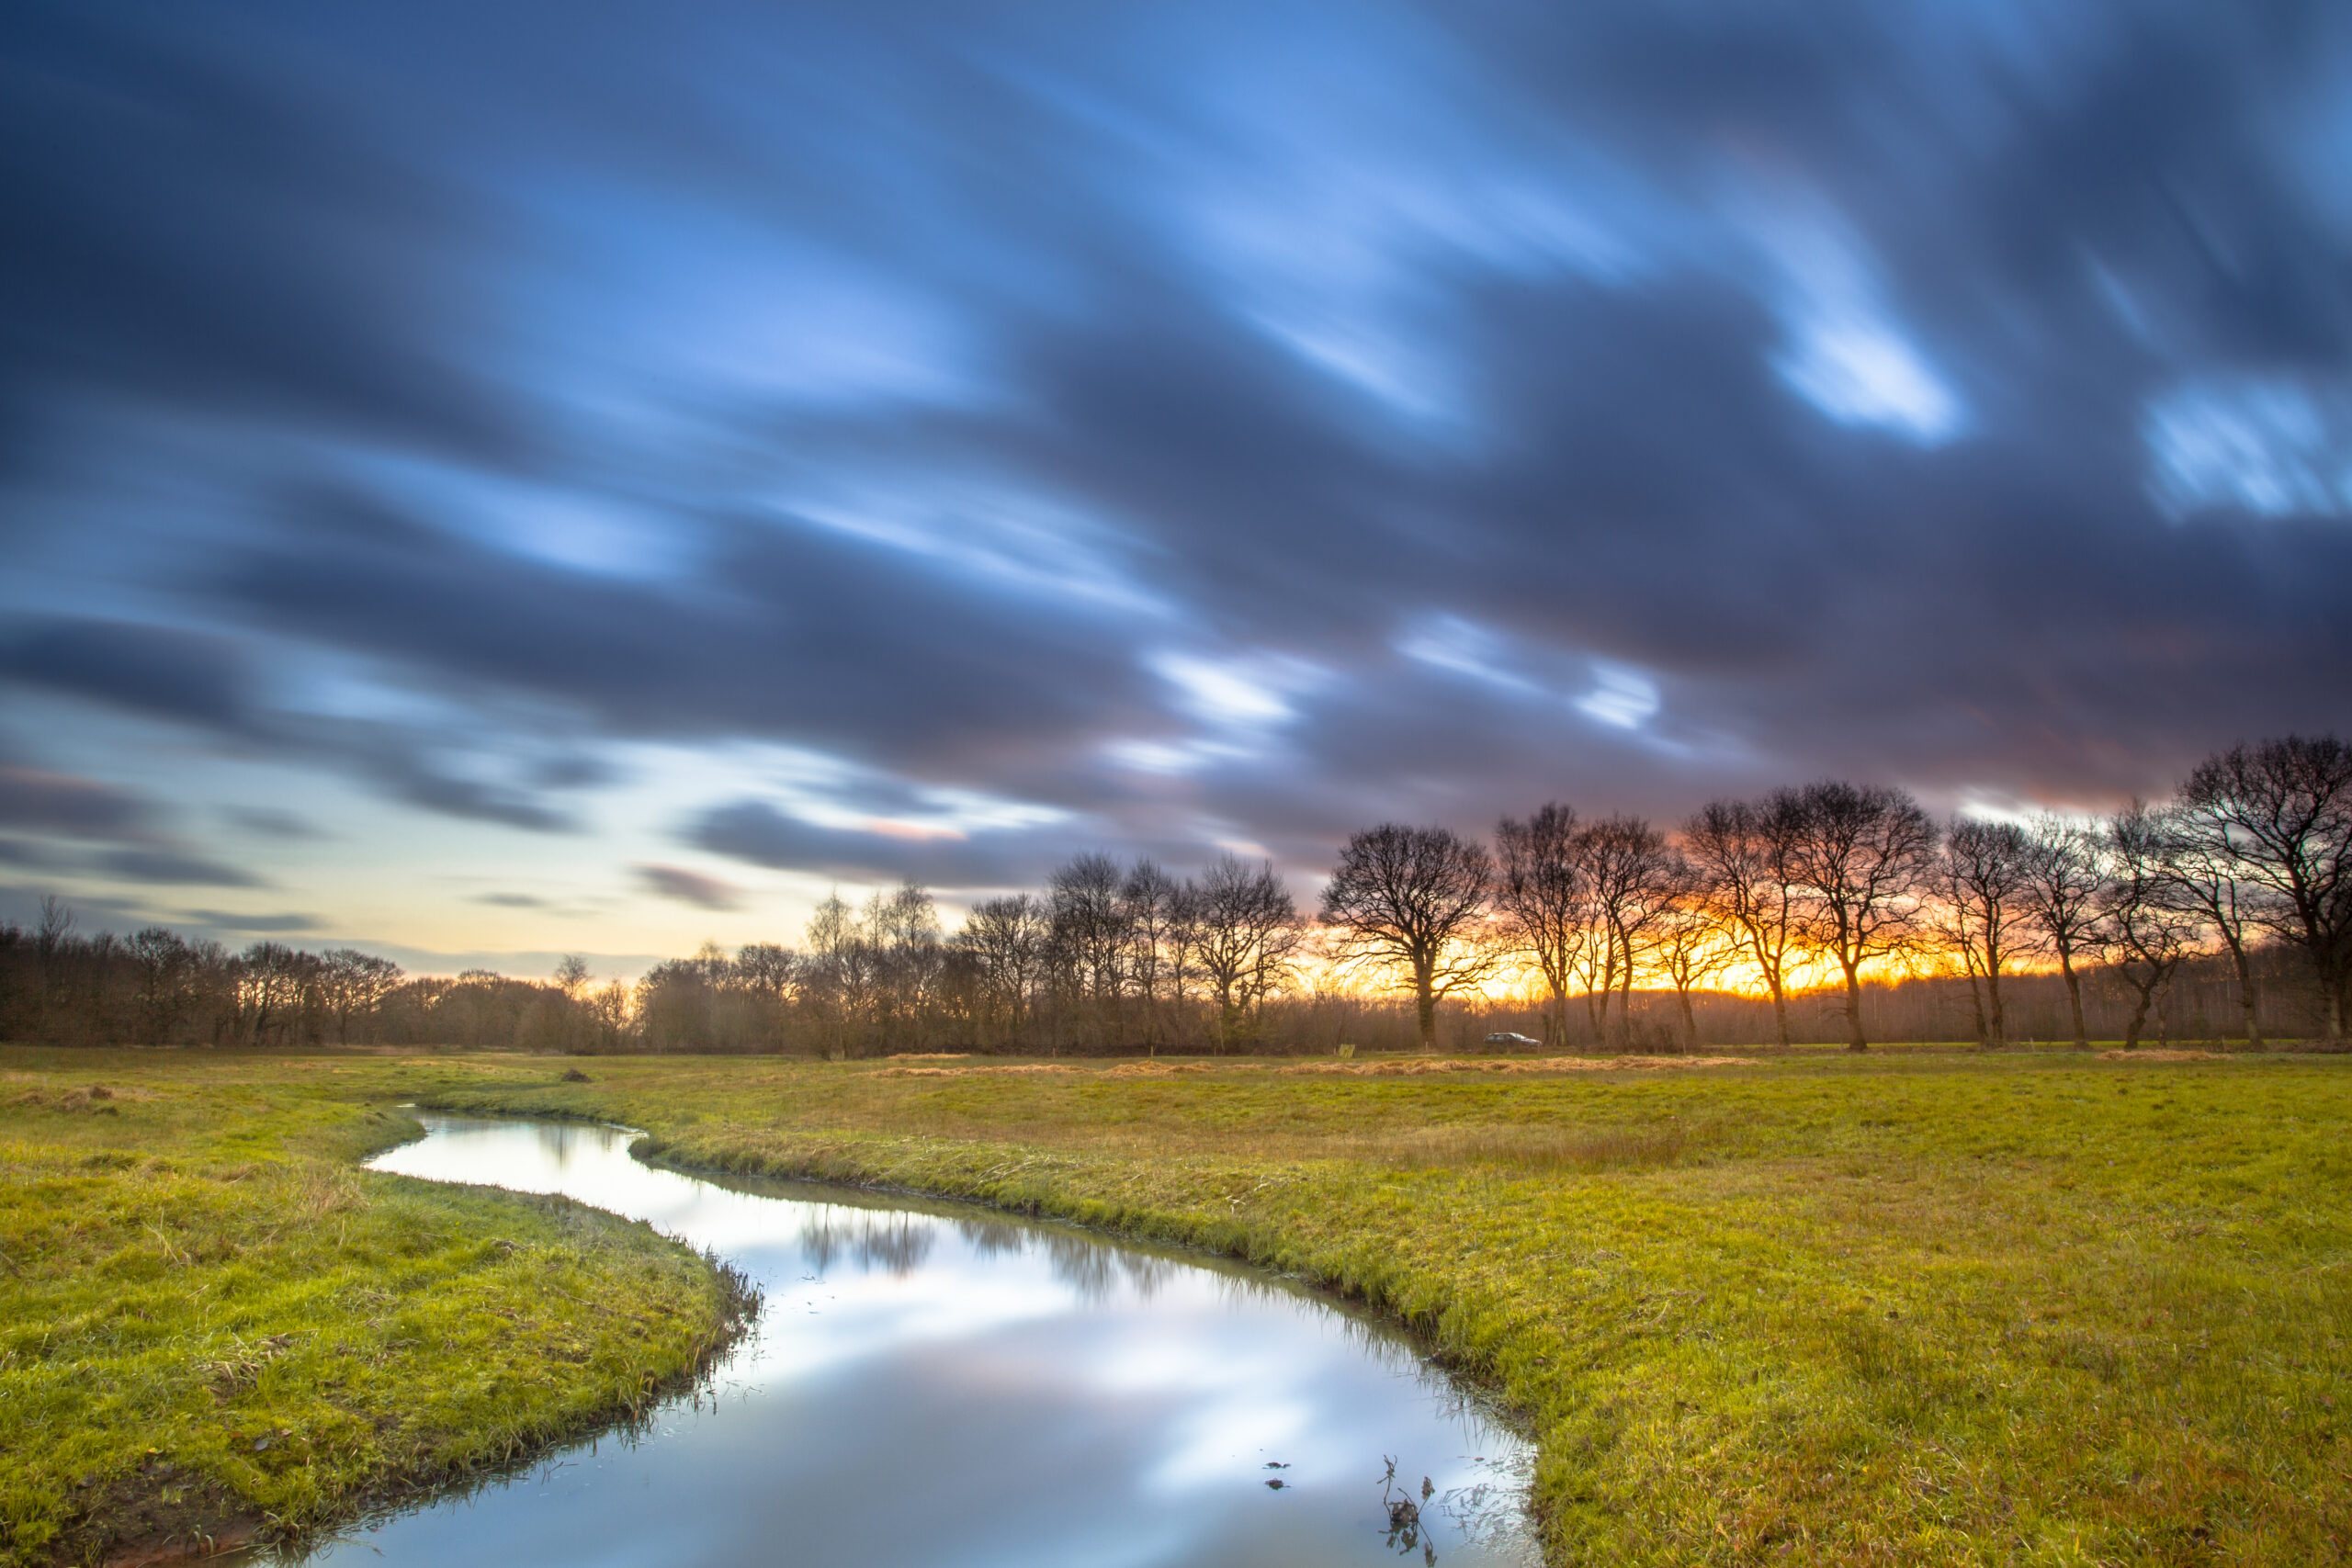 Photo of a stream running through a green, grassy meadow, with a line of trees and a sunset in the background, with the clouds in the sky blurry with motion.